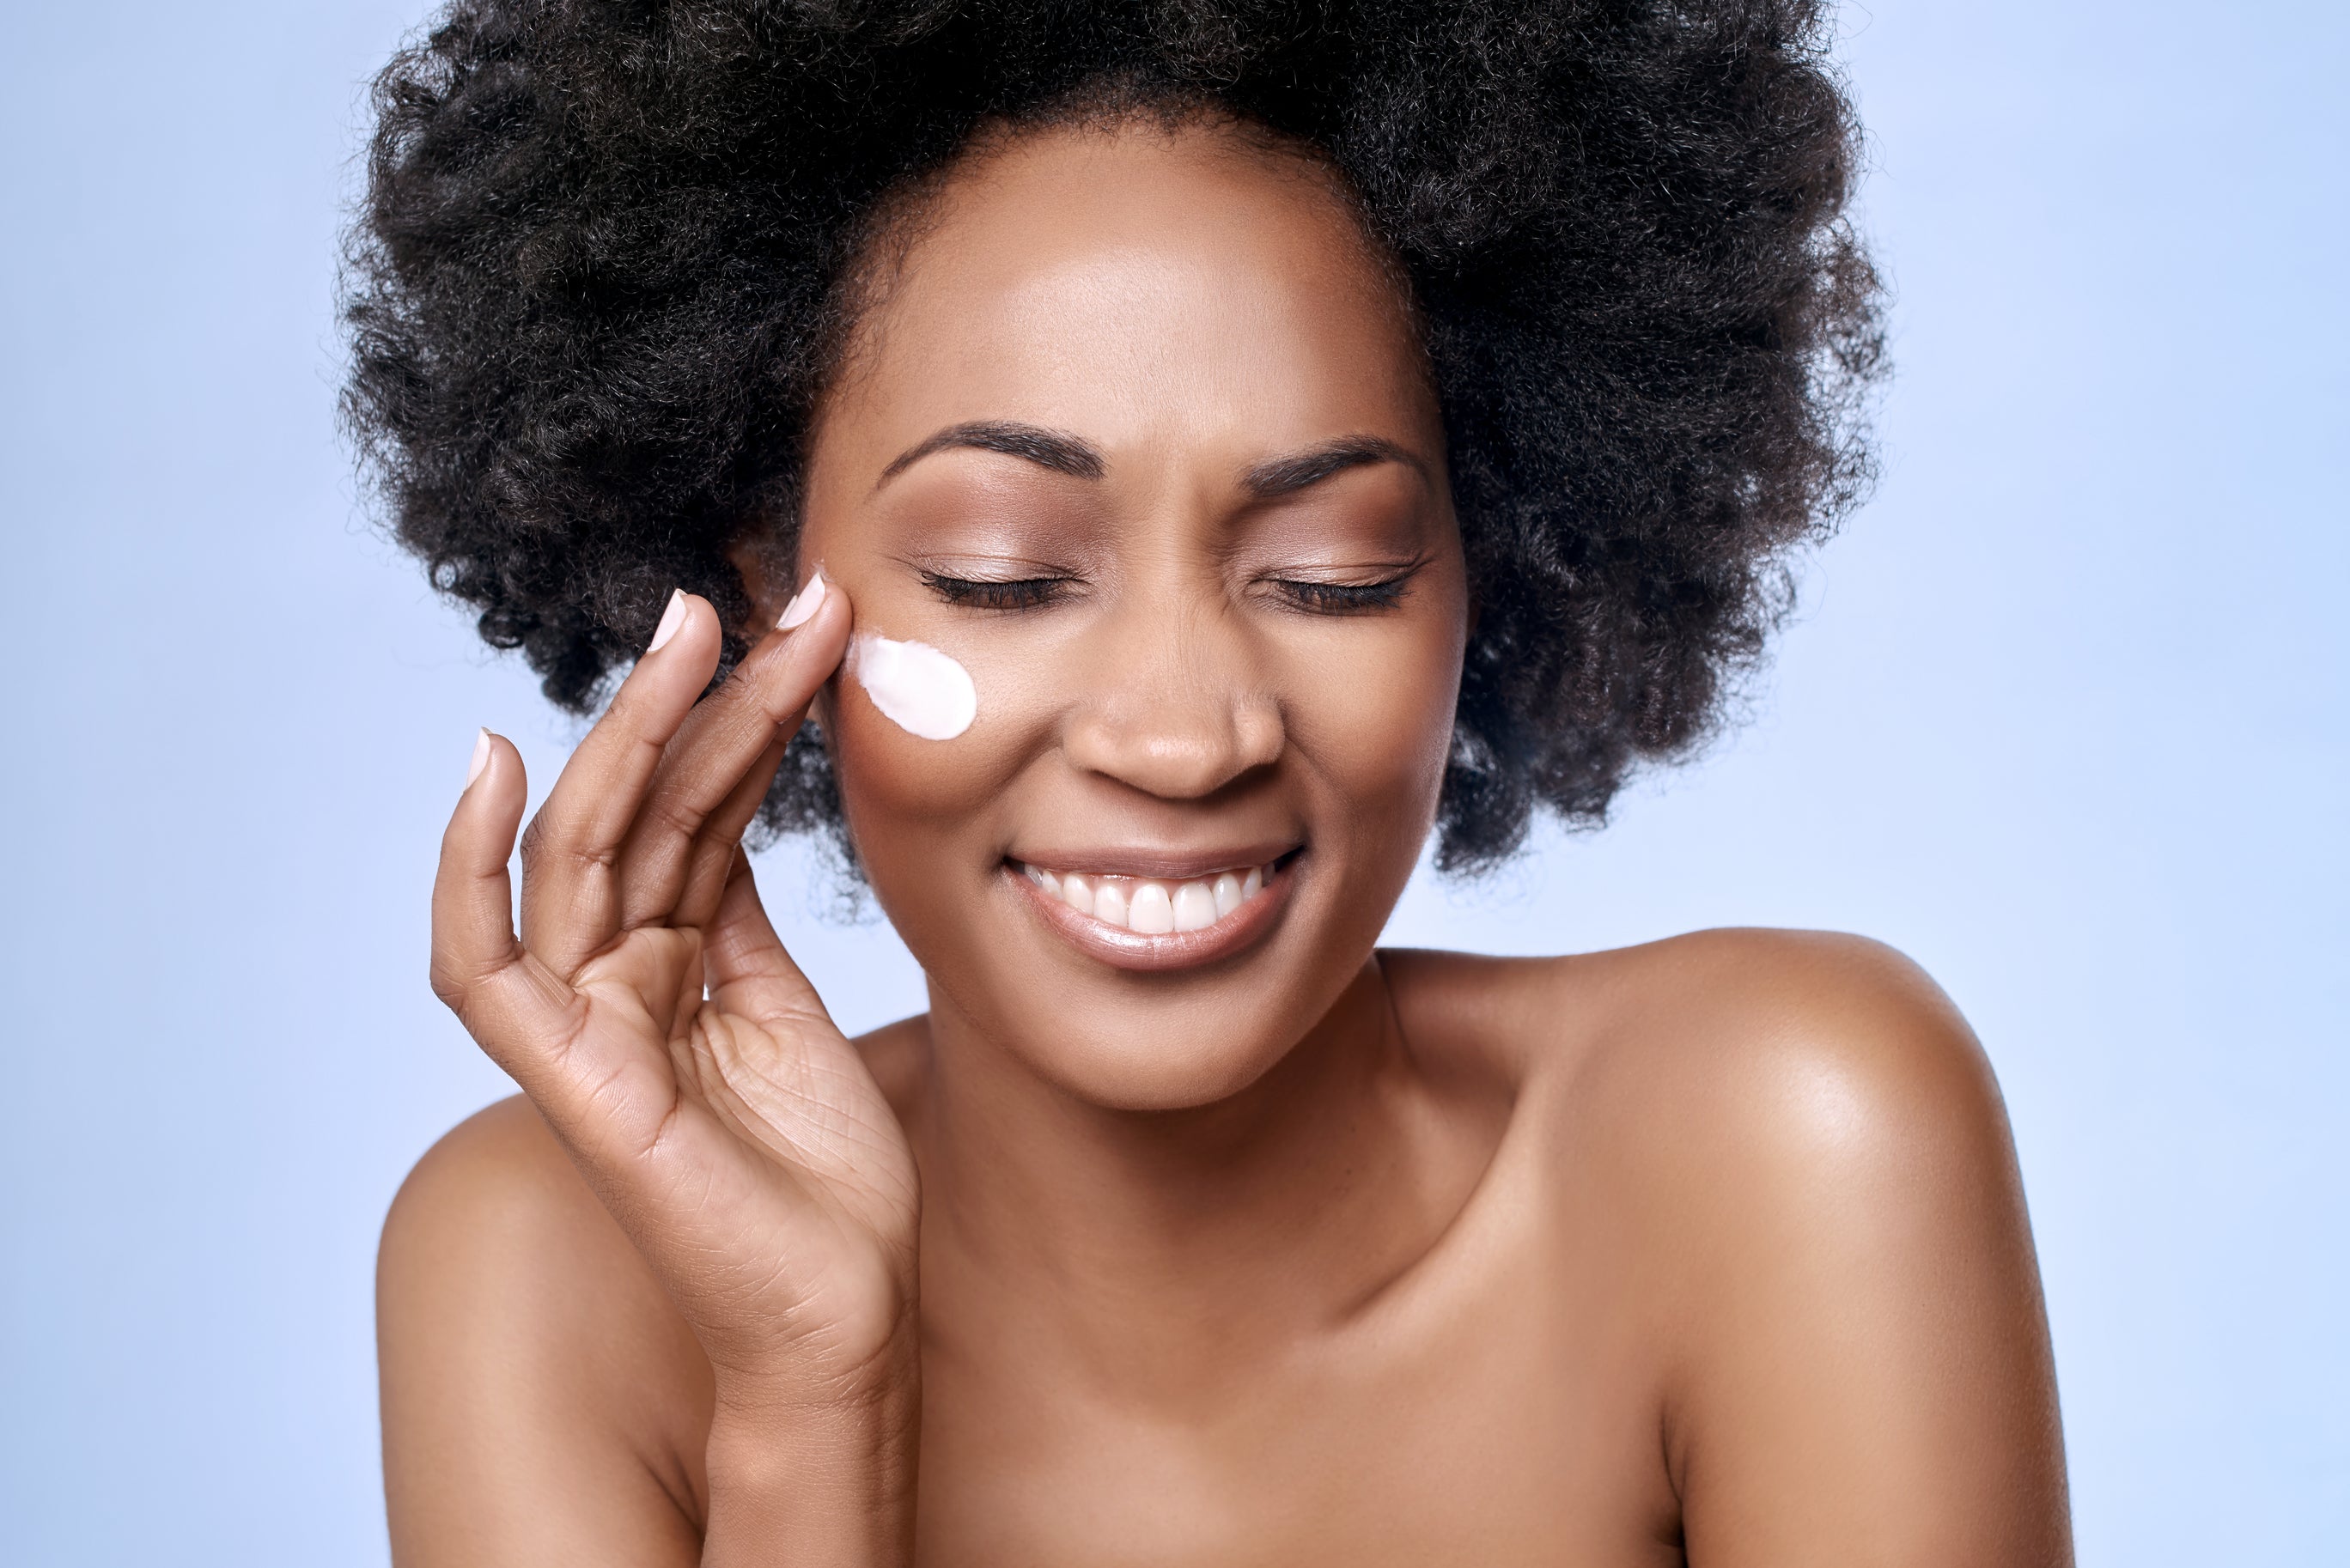 A happy black woman applies baby cream to her face. Concept of adults using baby products. Adults with sensitive skin using baby products.